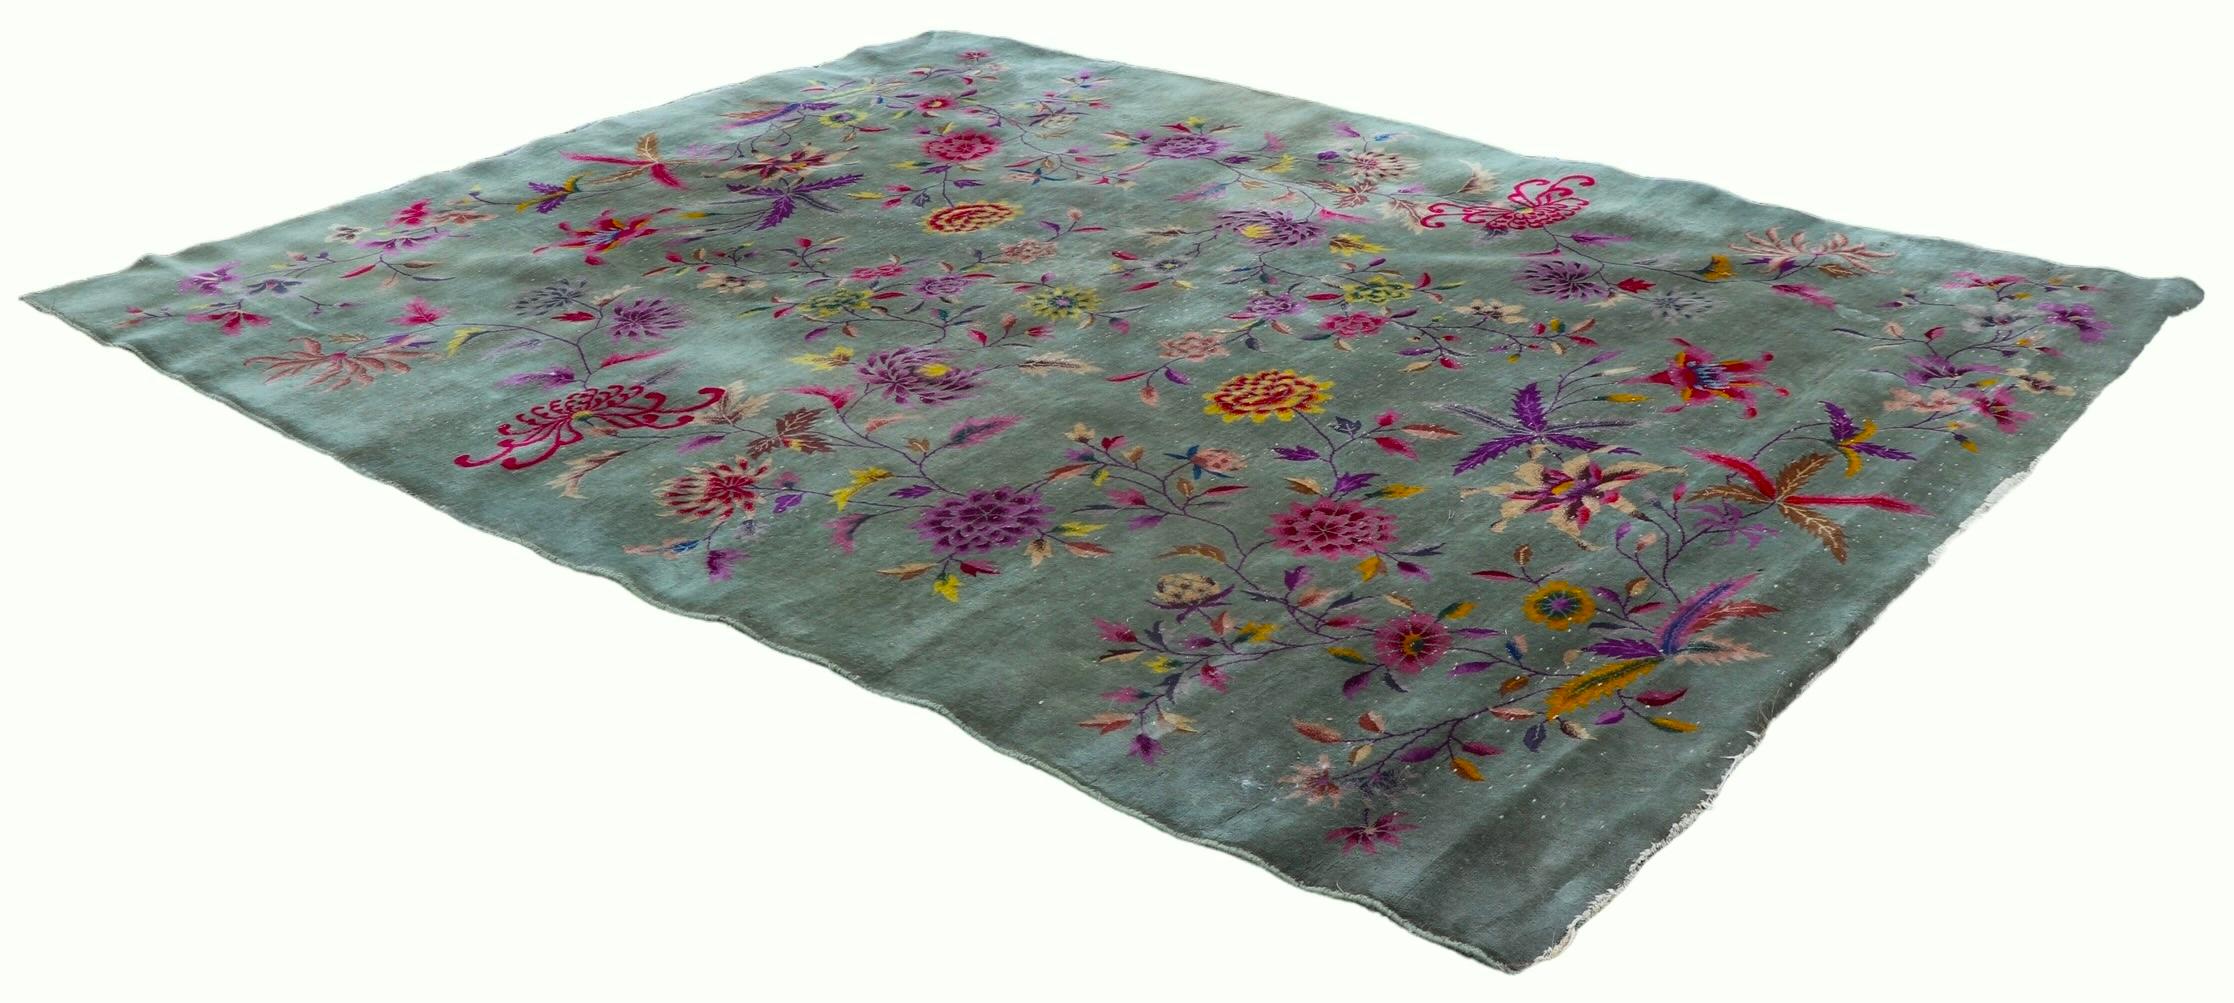 Art Deco Chinese Rug with Floral Motif c. 1920/1930's For Sale 13